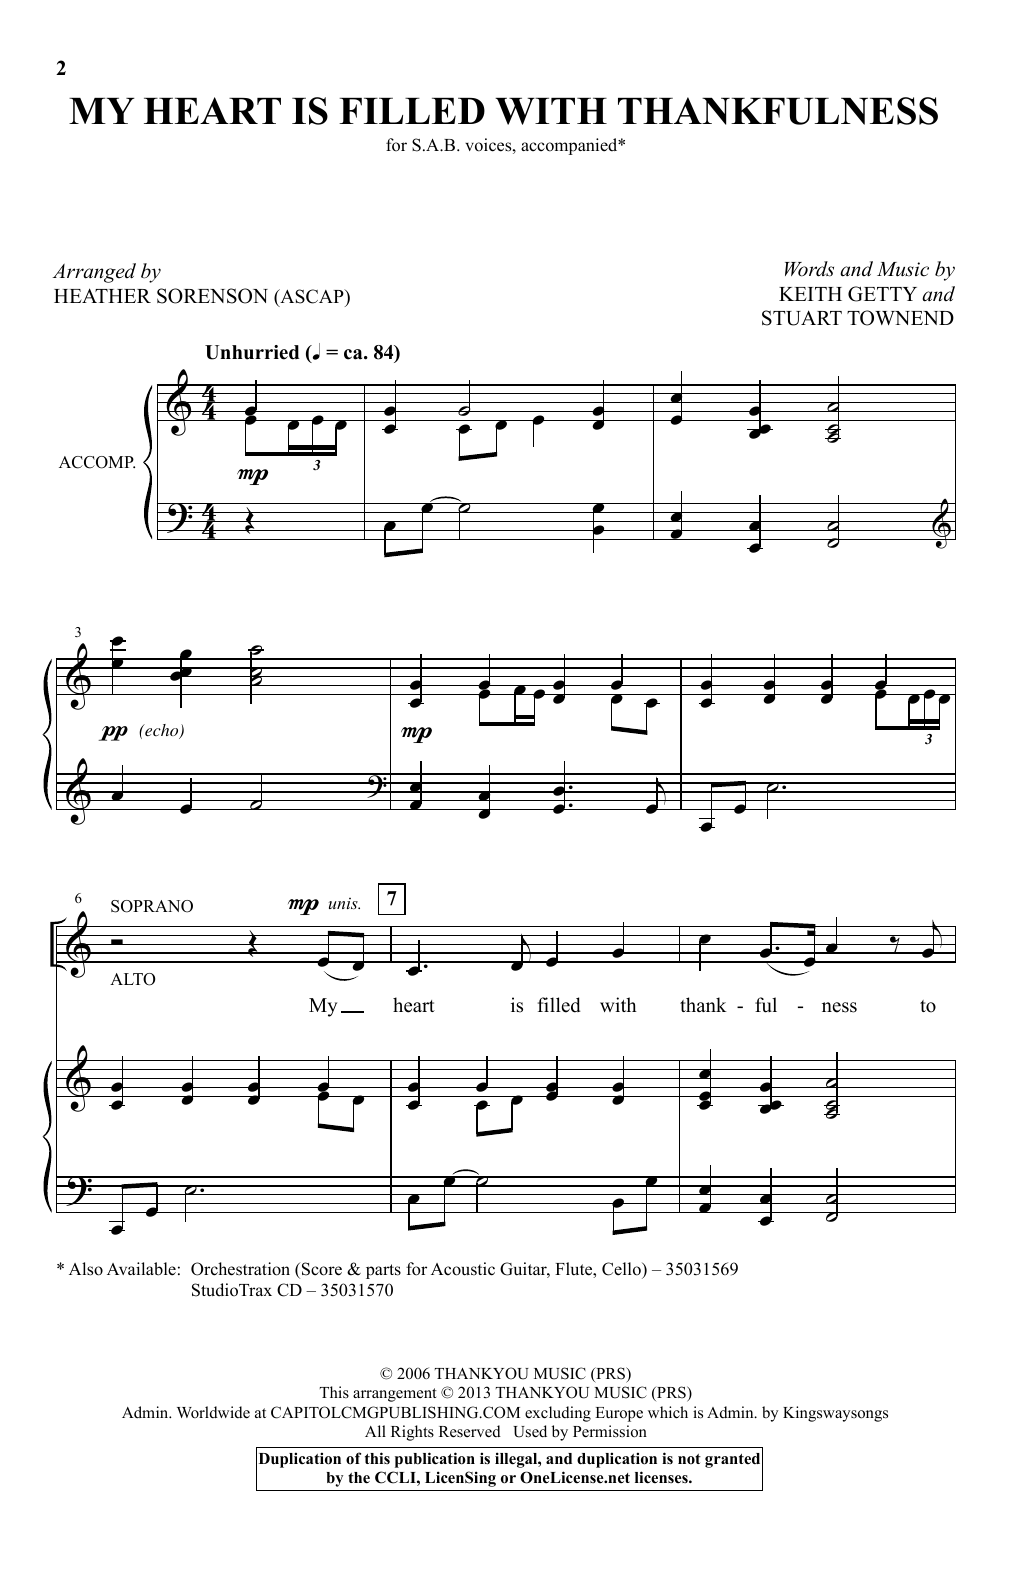 Download Heather Sorenson My Heart Is Filled With Thankfulness Sheet Music